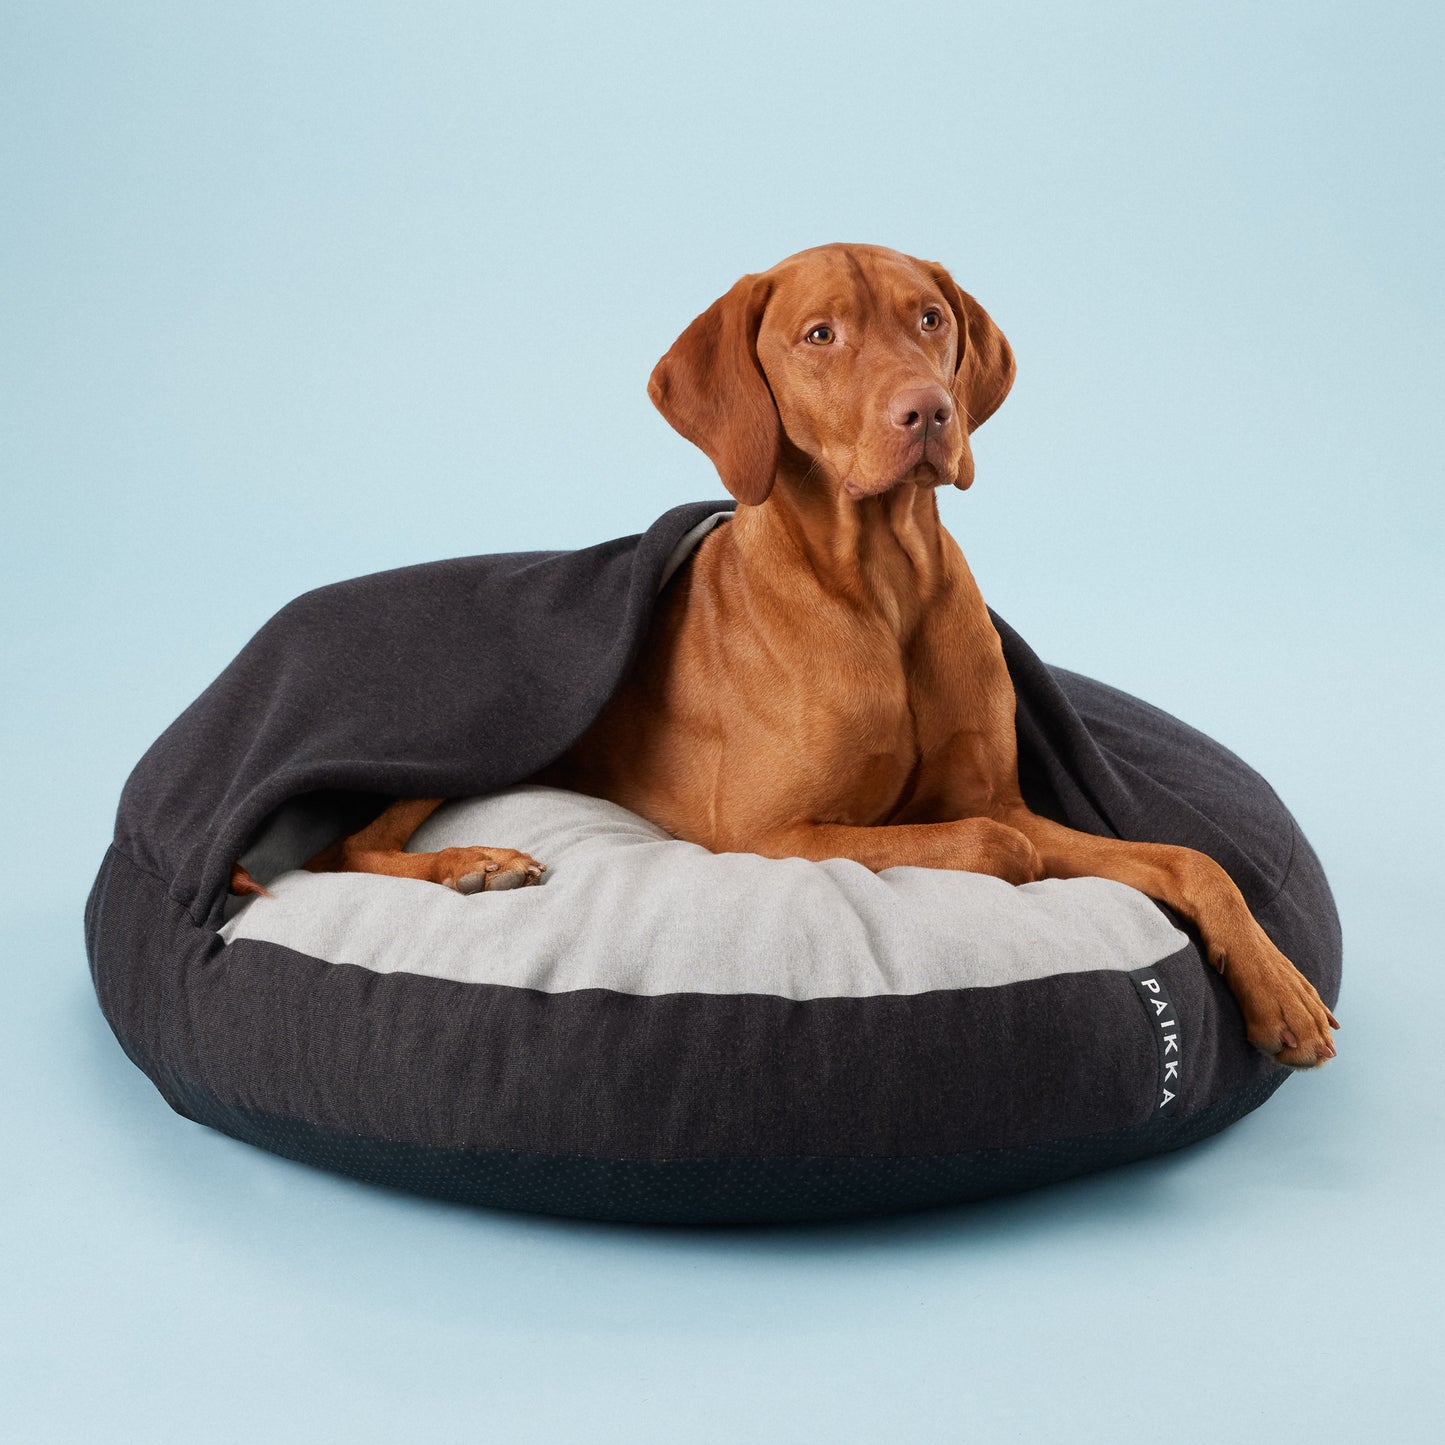 PAiKKA | Recovery Höhlen Bett grau | Recovery Burrow Bed for Pets grey